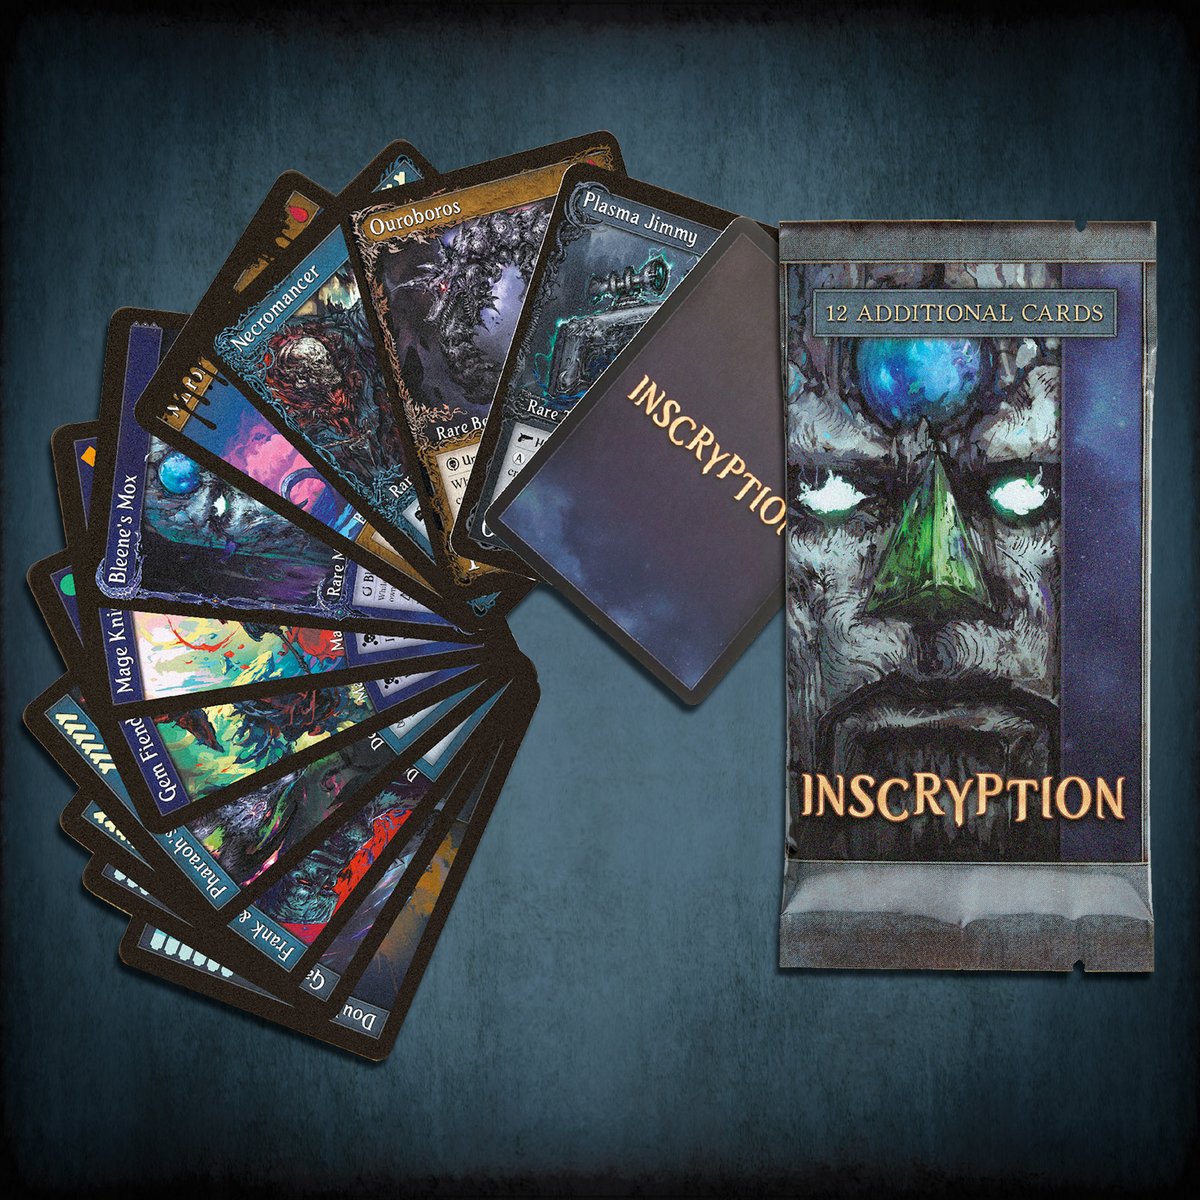 Hey Leshy called and said you gotta buy the second series of Inscryption trading cards or he's gonna burn a house down. Maybe your house, he didn't specify.